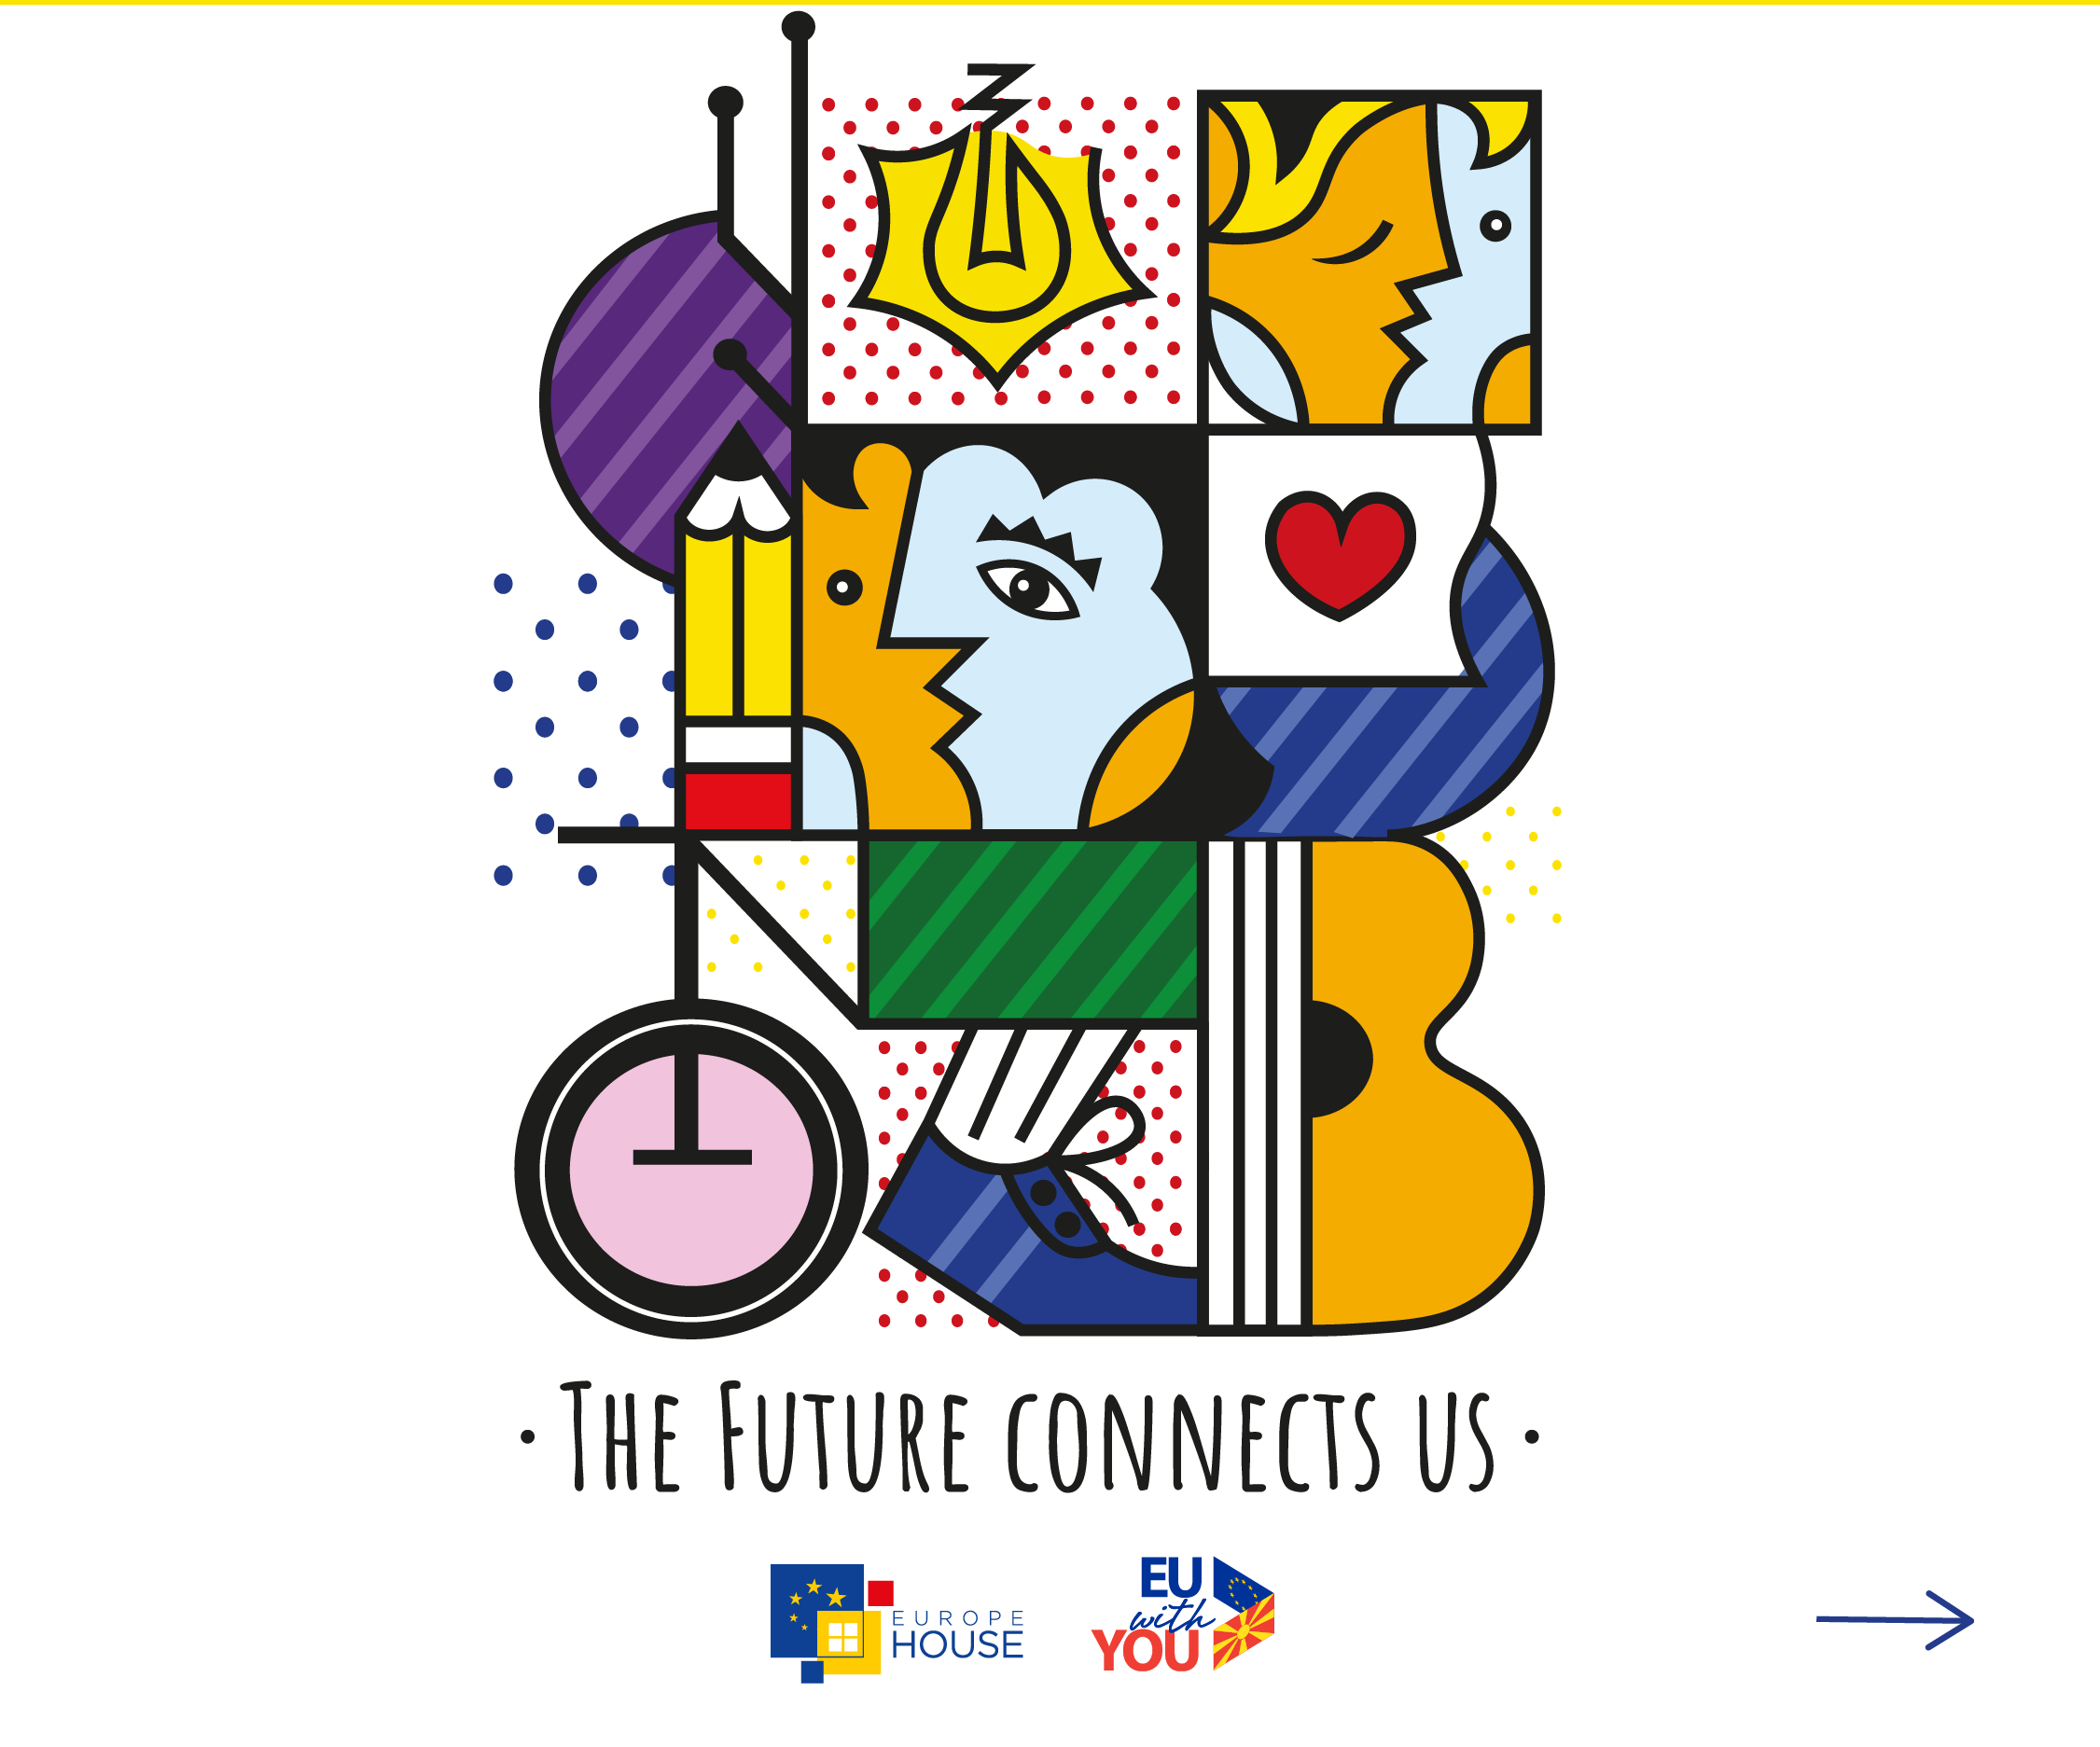 JOIN THE CELEBRATION FOR EUROPE DAY 2023 AND BE PART OF THE FUTURE THAT BRINGS US TOGETHER!